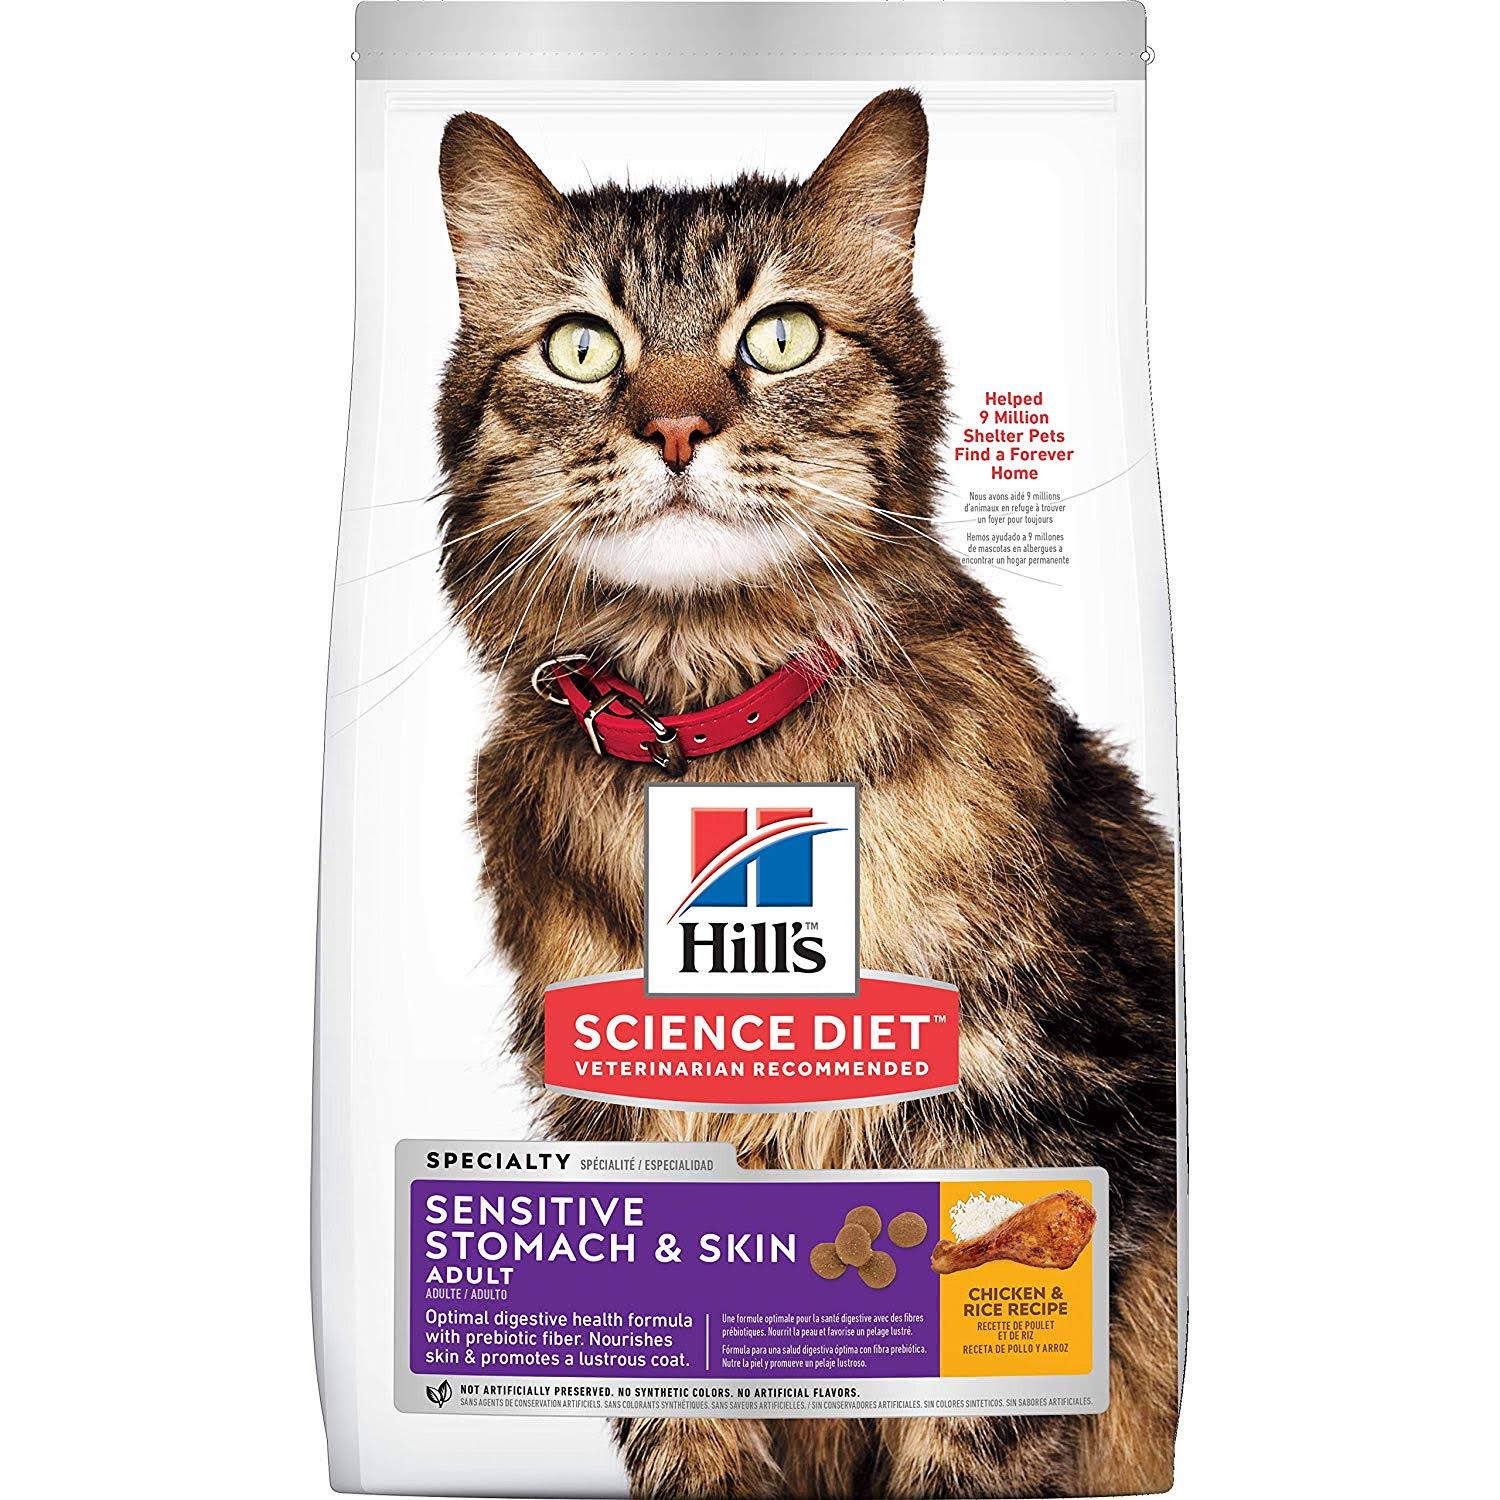 Hill's Science Diet Sensitive Stomach and Skin Cat Food - Rice and Egg Recipe, Adult, 3.5lbs